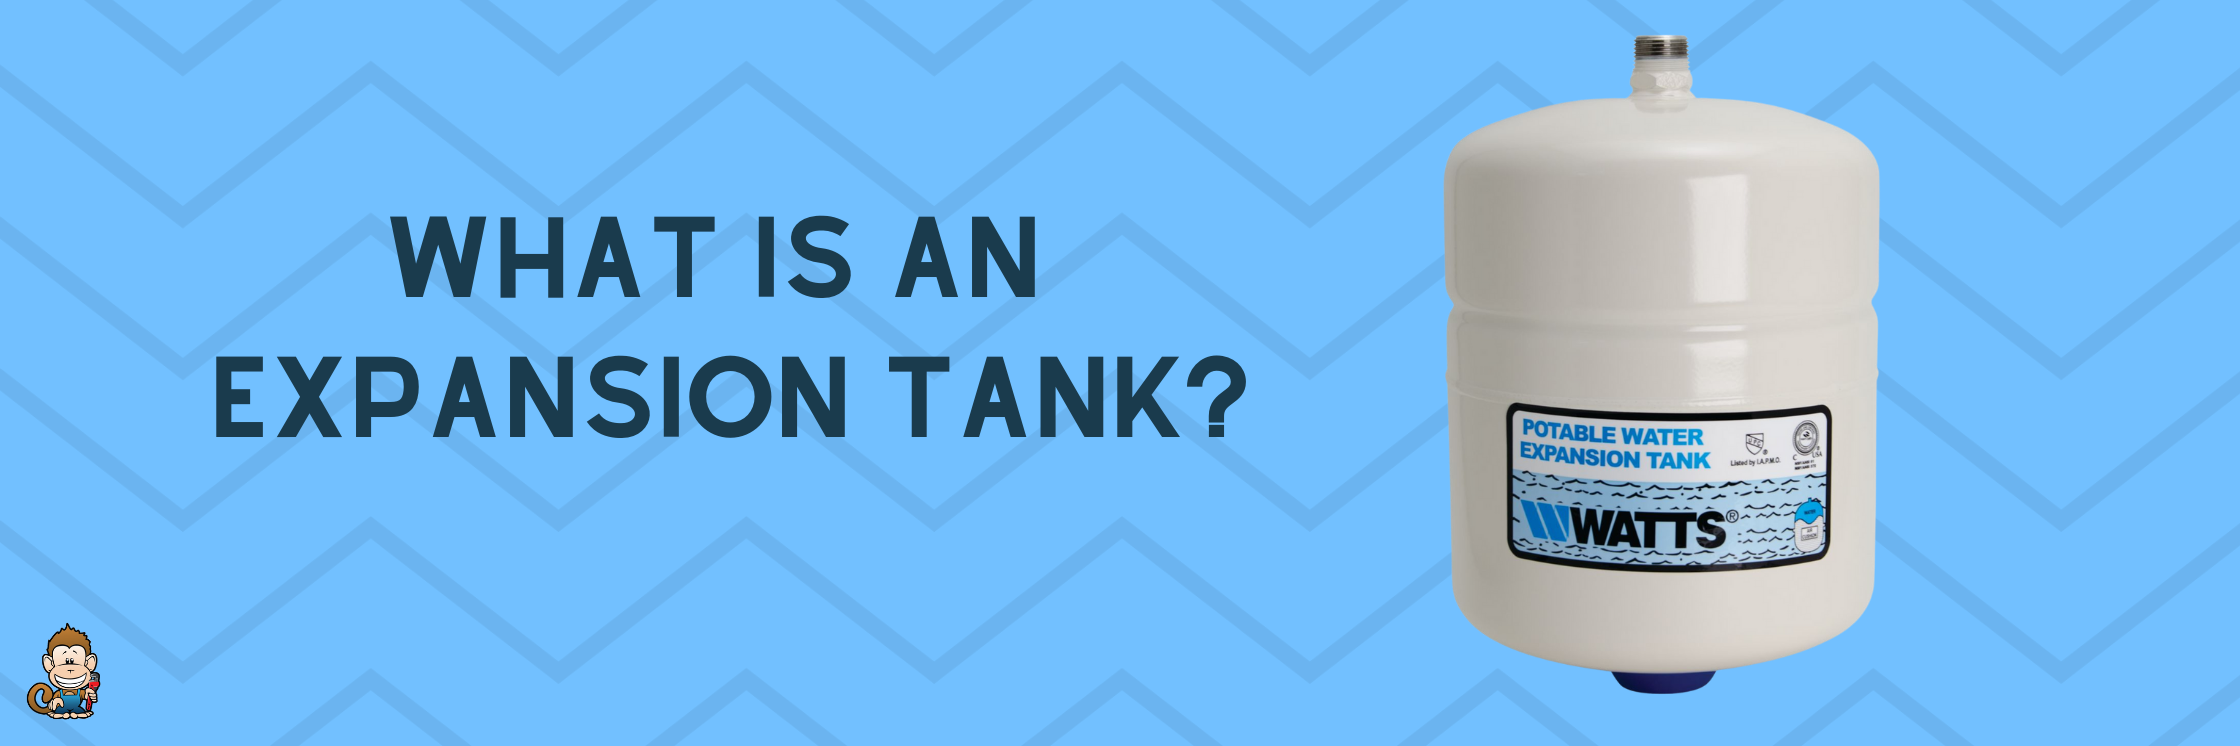 What is an Expansion Tank?